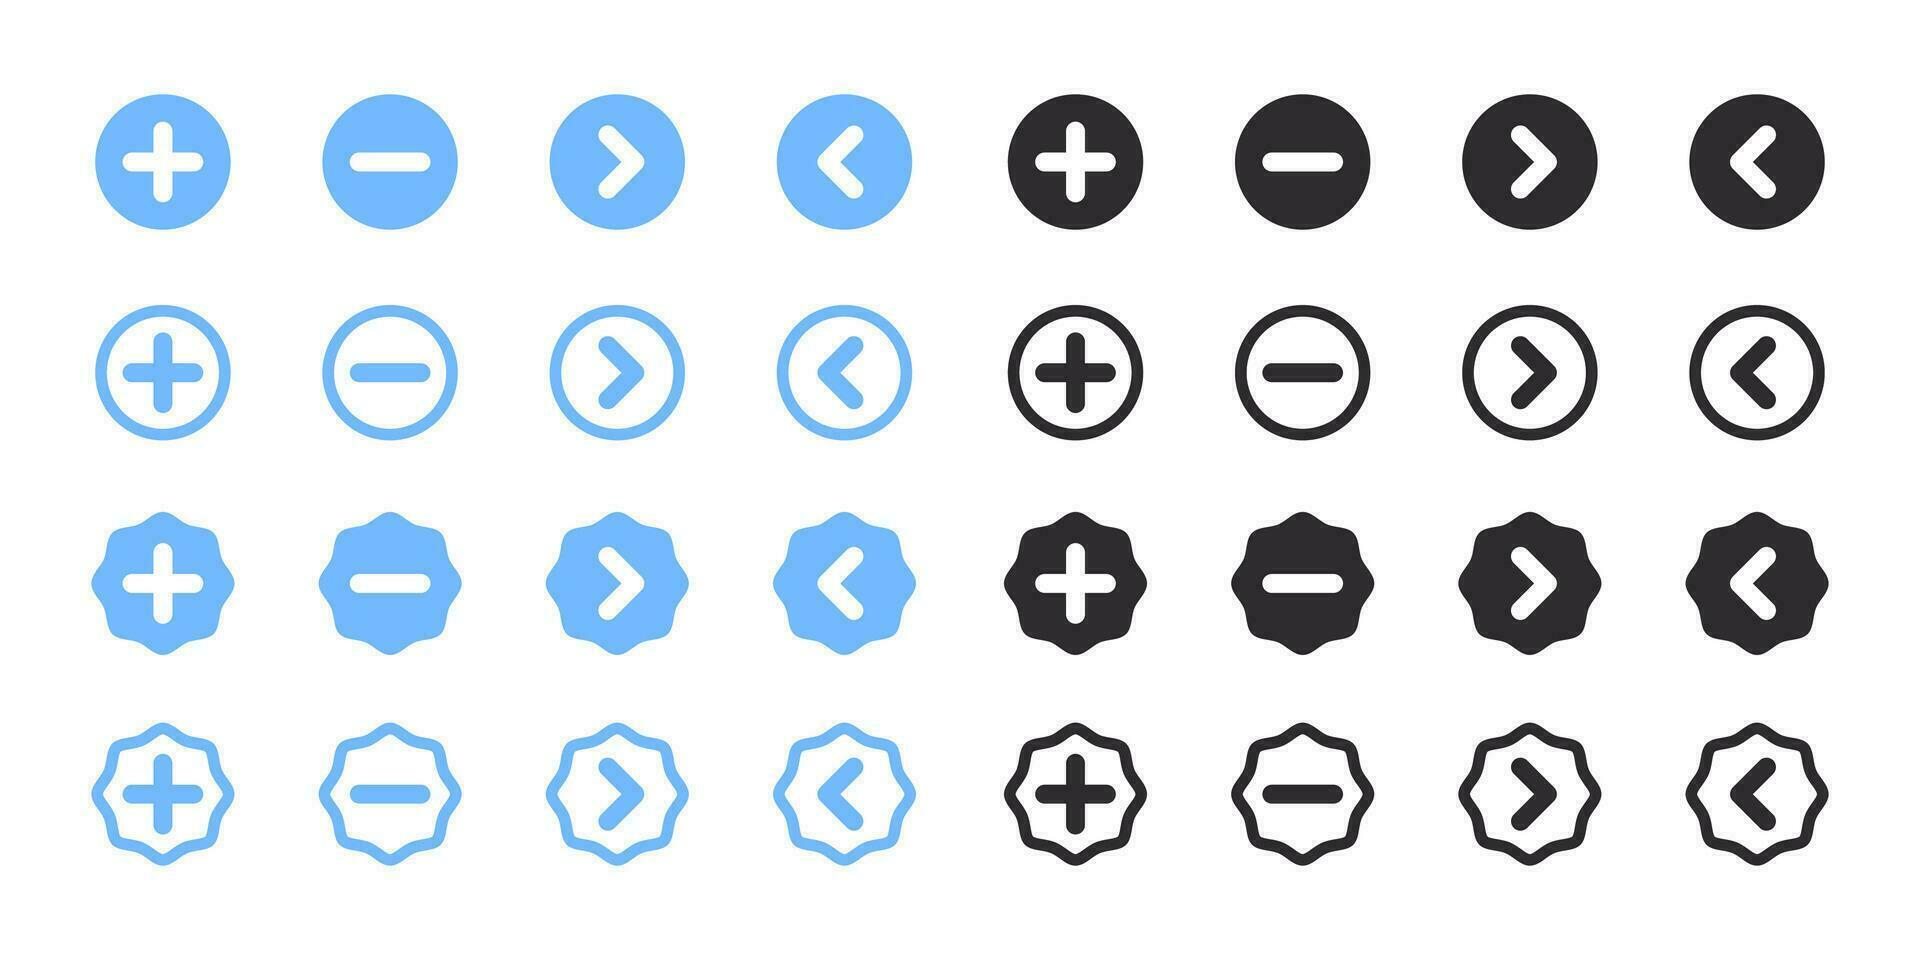 Arrows icons set. Blue and black arrows icons. Vector scalable graphics